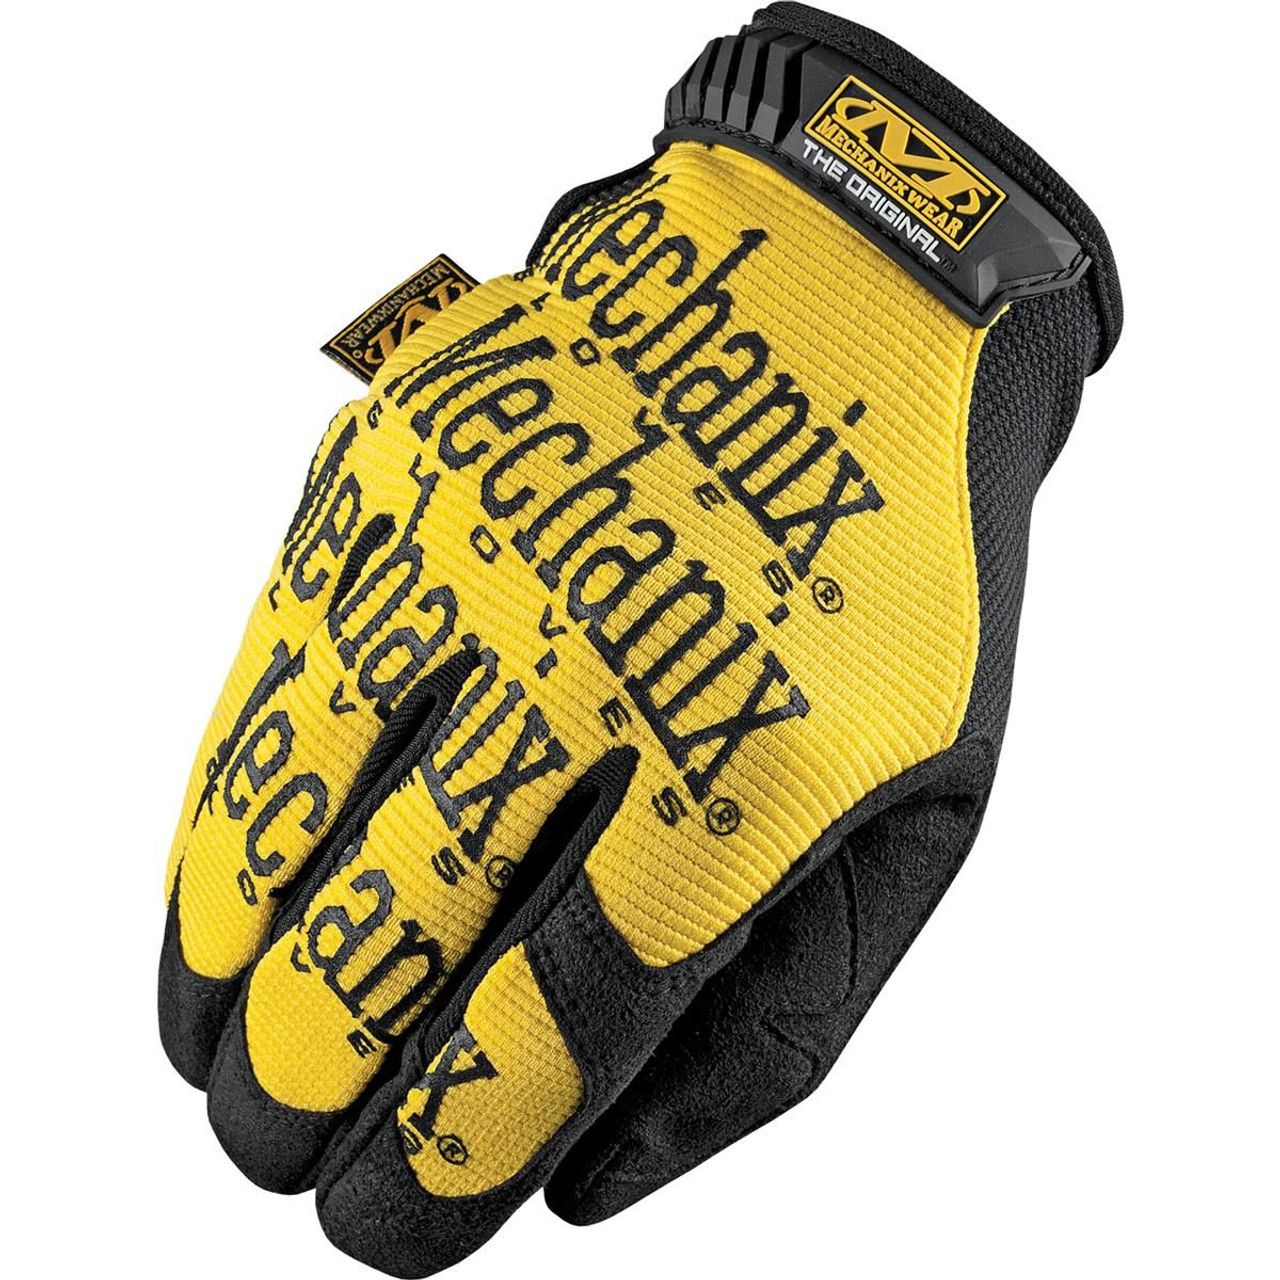 Mechanix Wear: The Original Tactical Work Gloves with Secure Fit